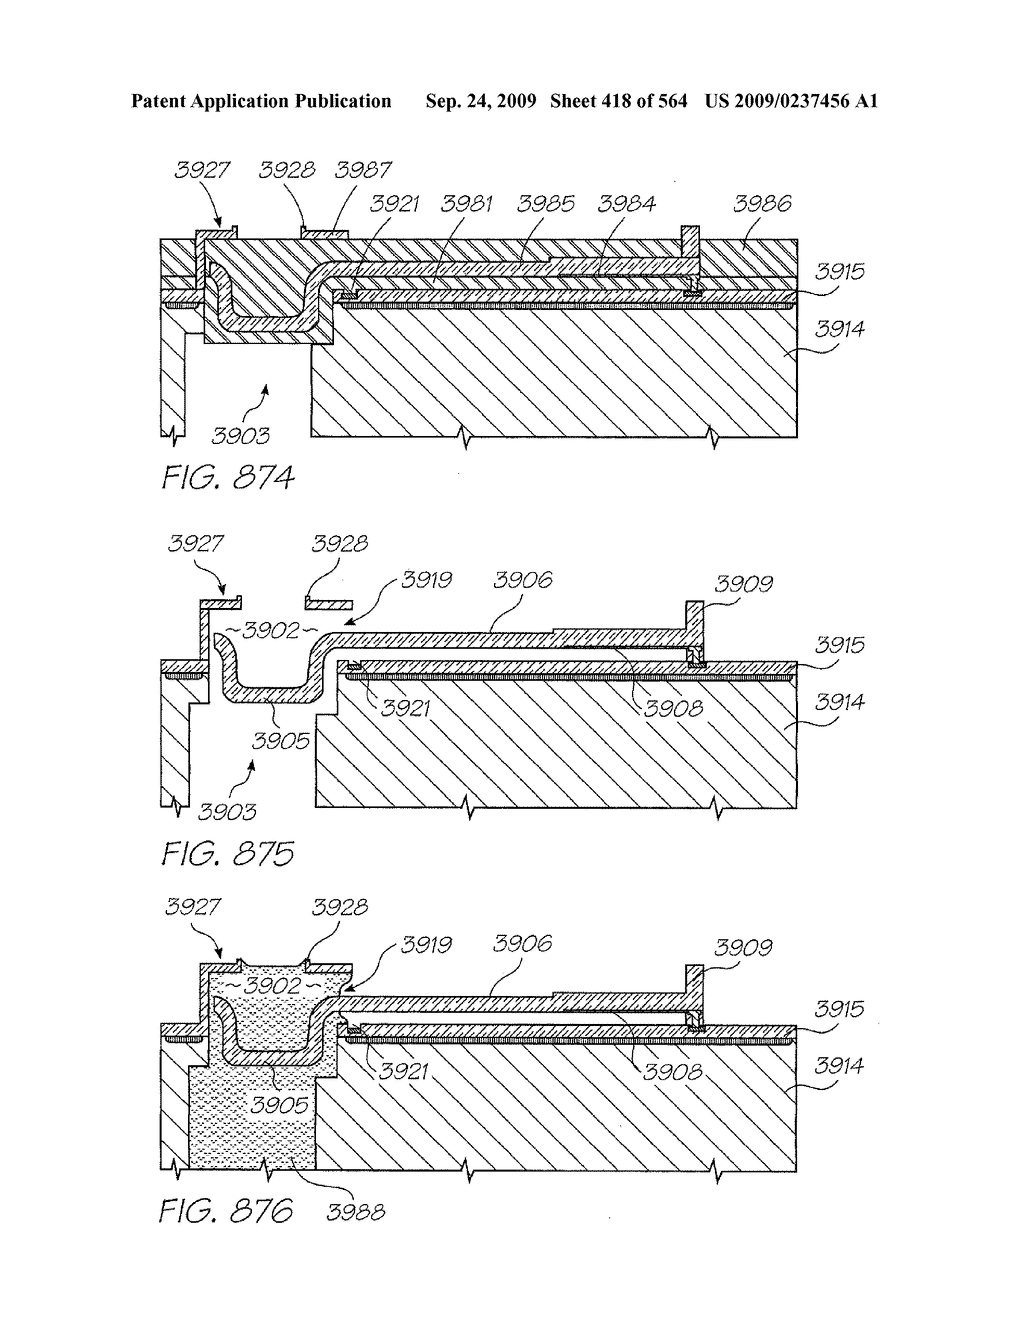 Inkjet Printhead With Paddle For Ejecting Ink From One Of Two Nozzles - diagram, schematic, and image 419